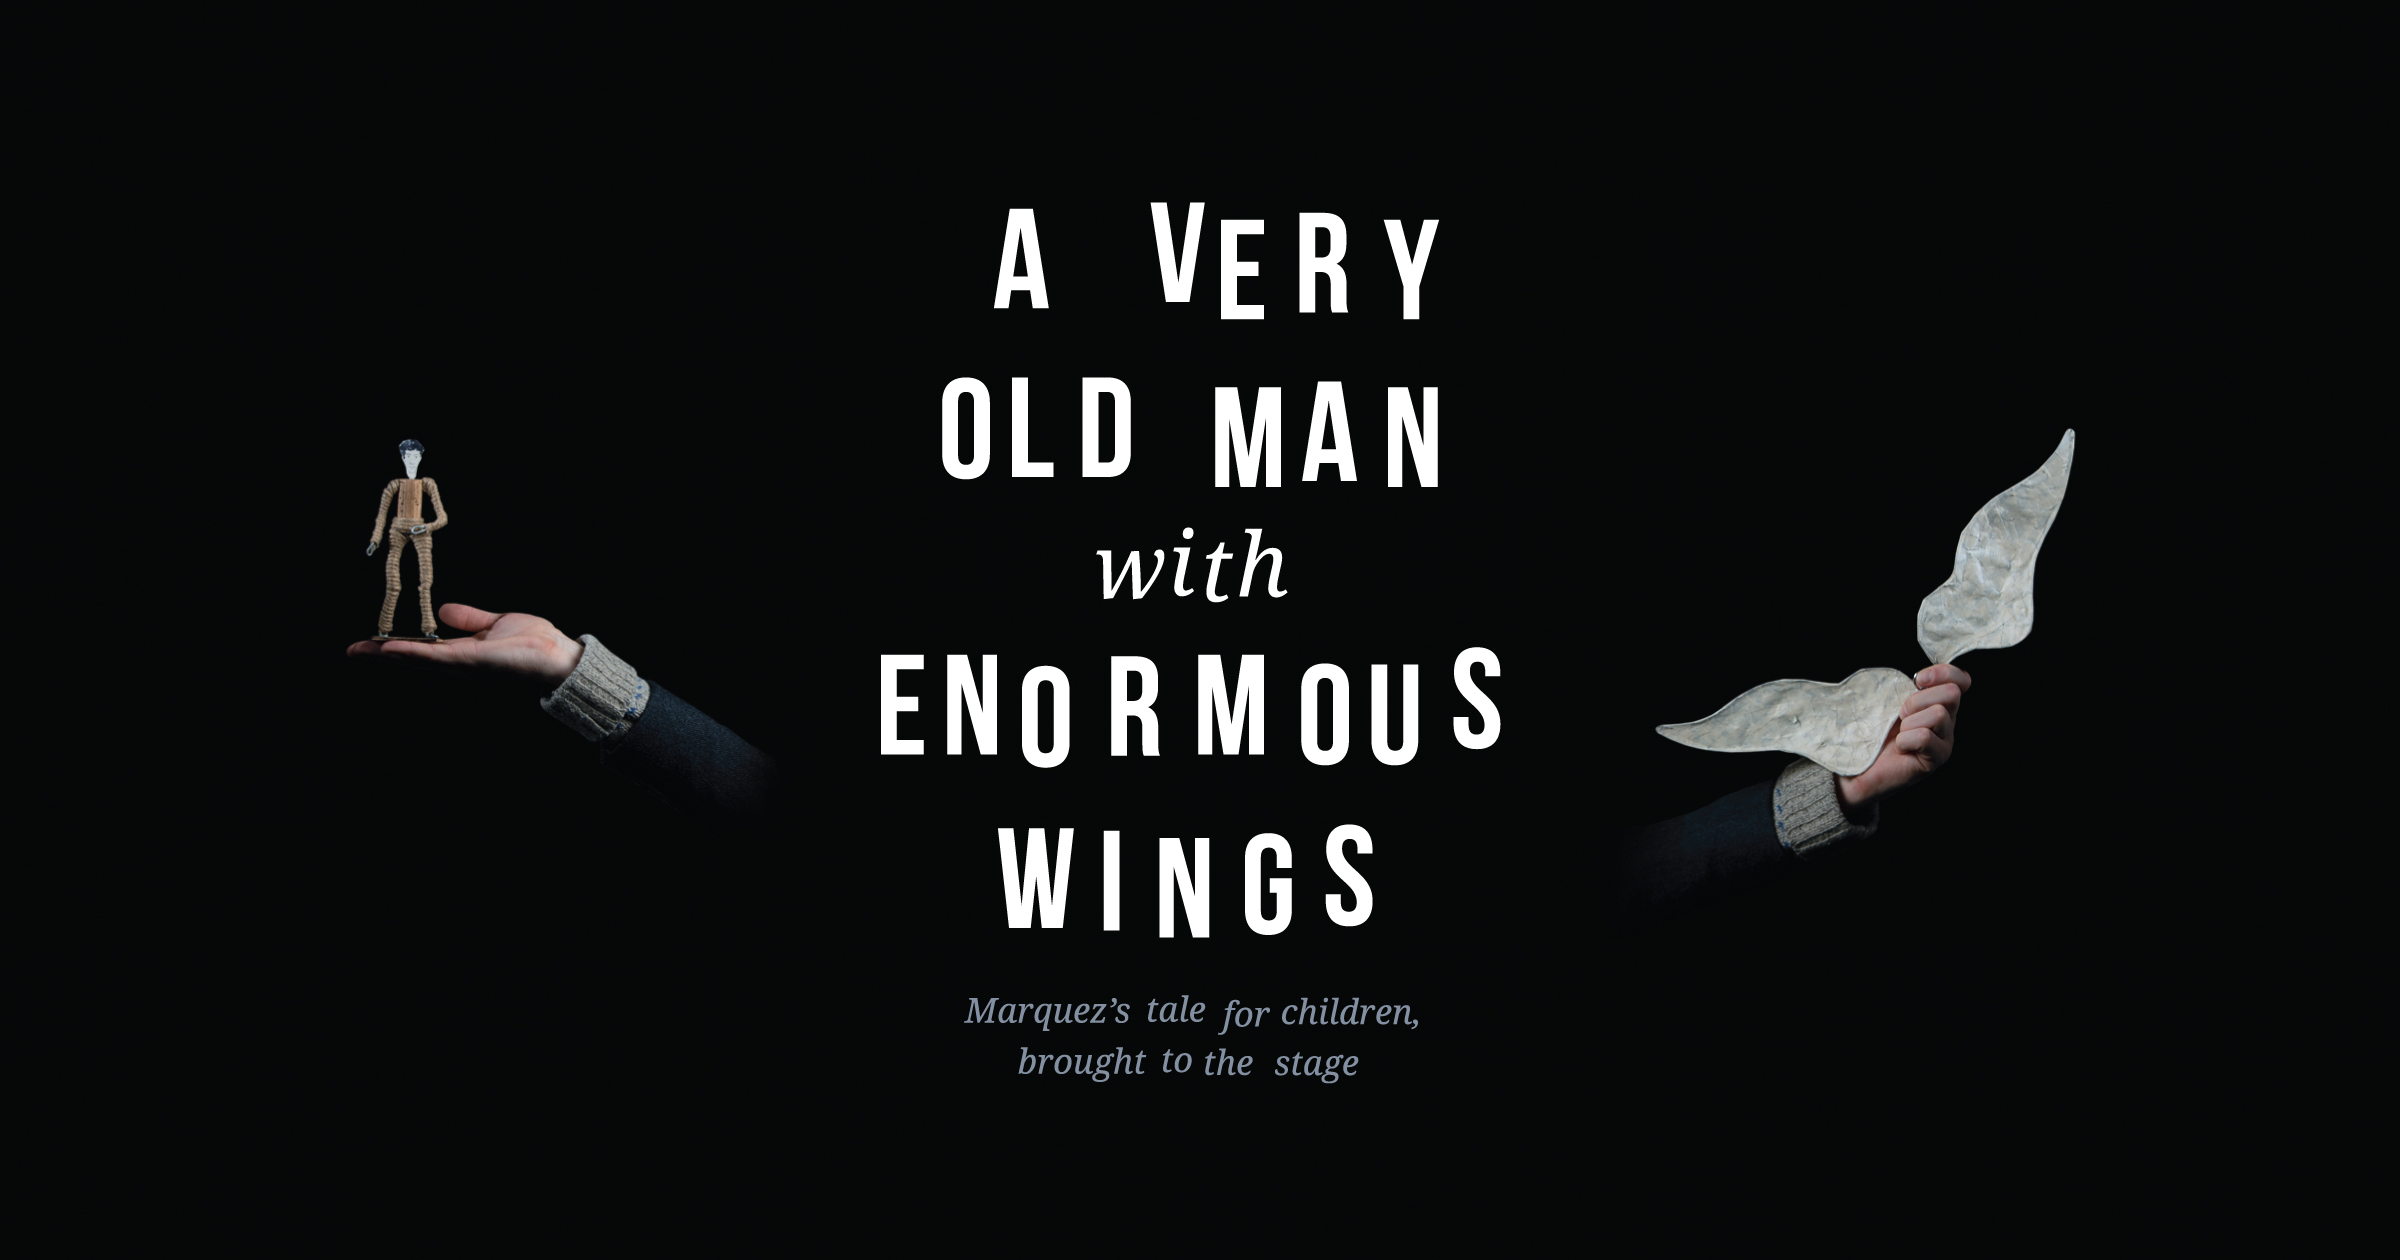 Collapsing Horse / A Very Old Man with Enormous Wings – Poster